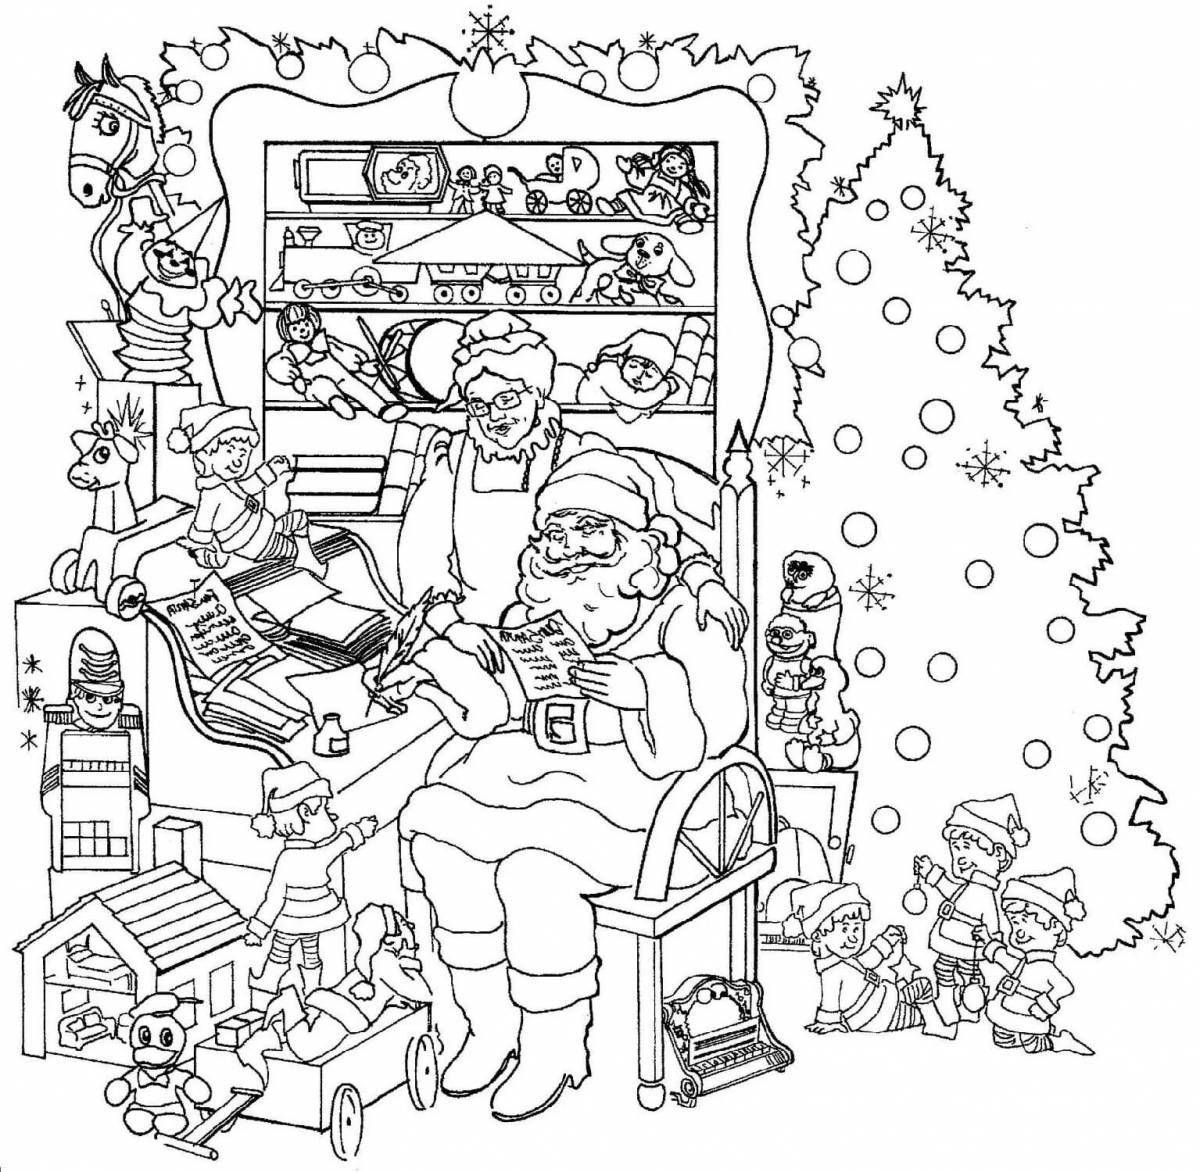 Great cool Christmas coloring book